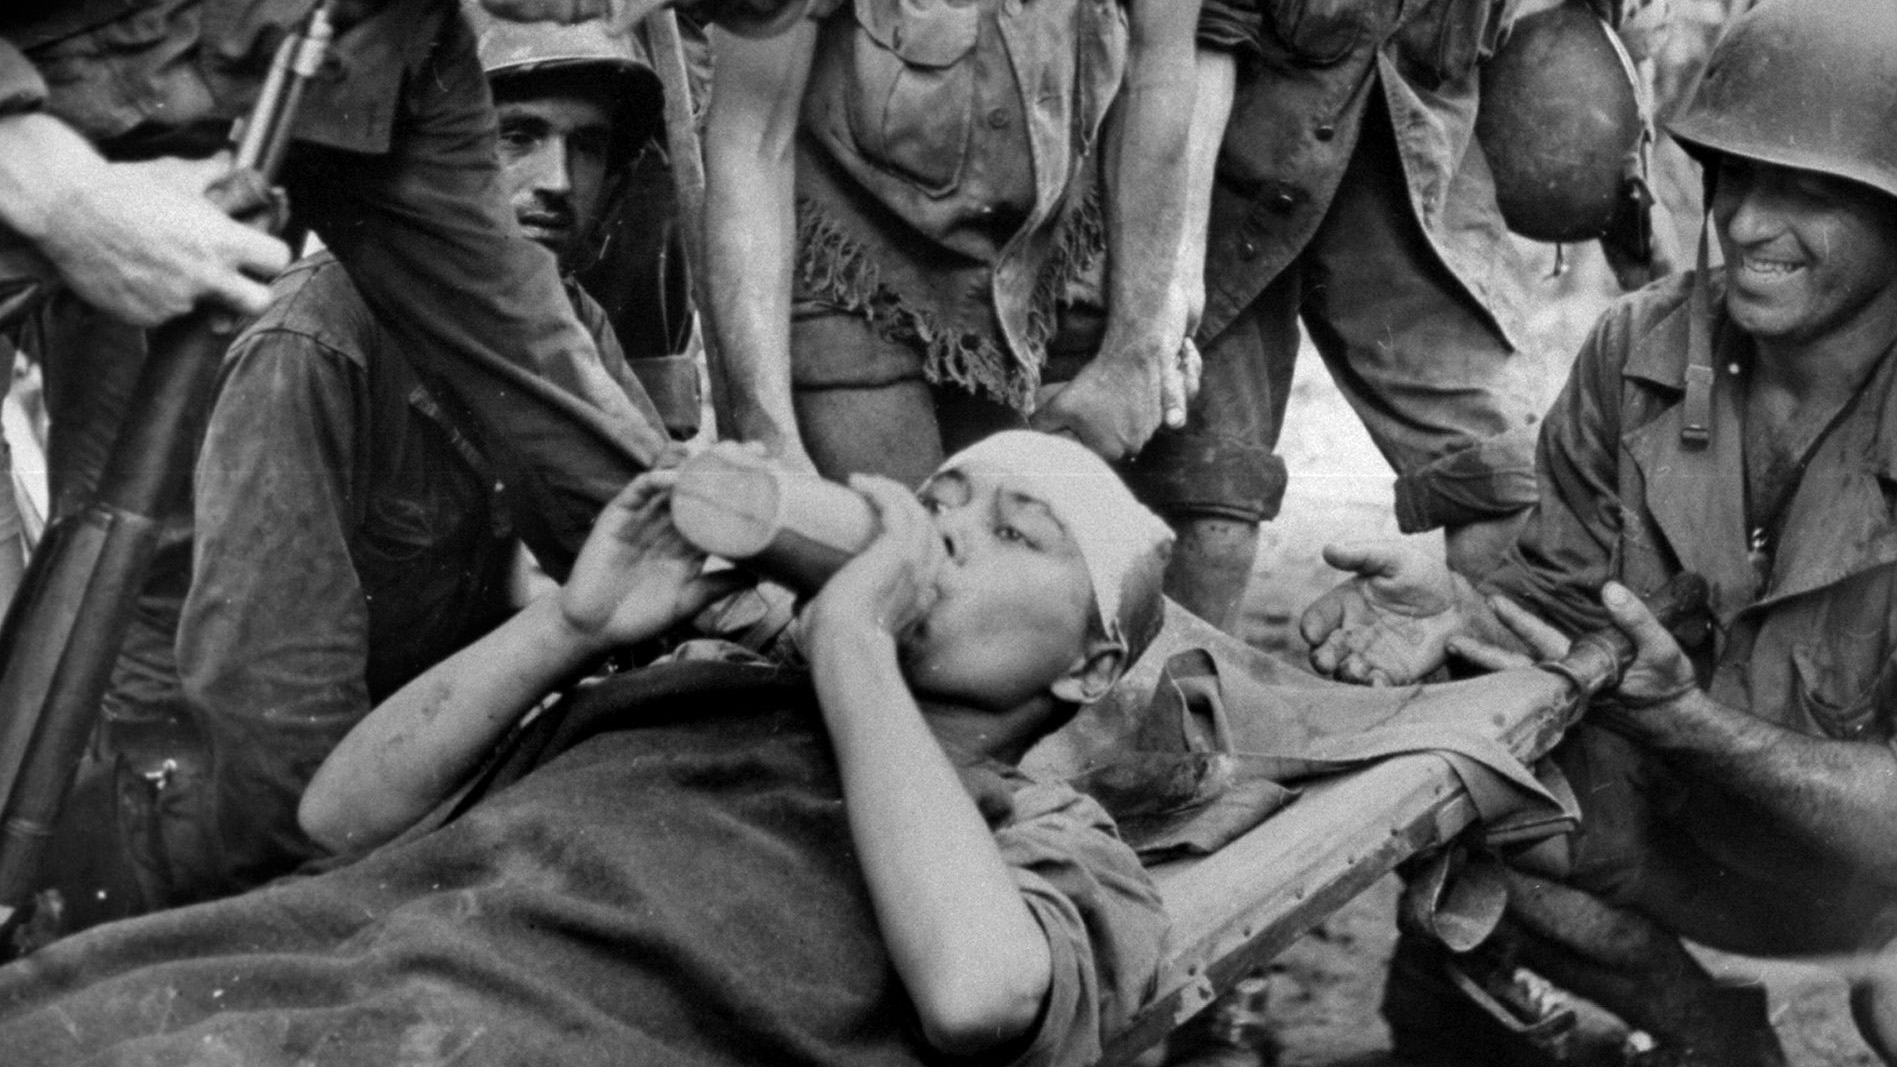 A Korean pressed into working as a slave laborer for the Japanese on the island of New Guinea receives medical treatment after his liberation. Thousands of Koreans were forced to construct installations and fortifications across the Pacific for their Japanese captors.